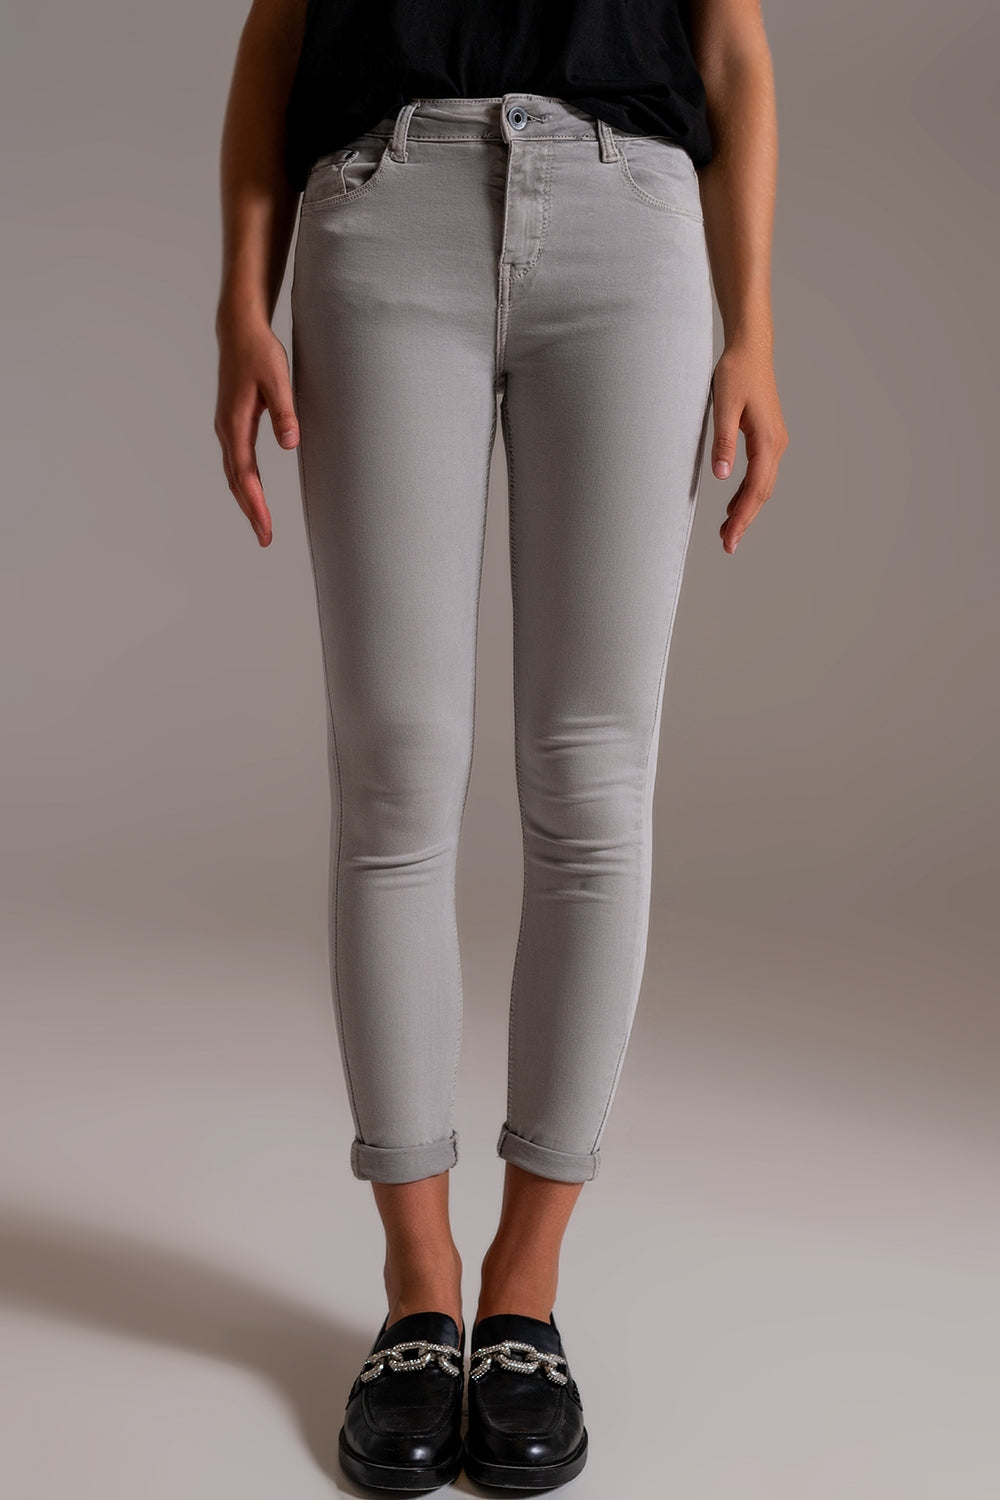 Q2 Light gray ankle jeans with soft wrinkles